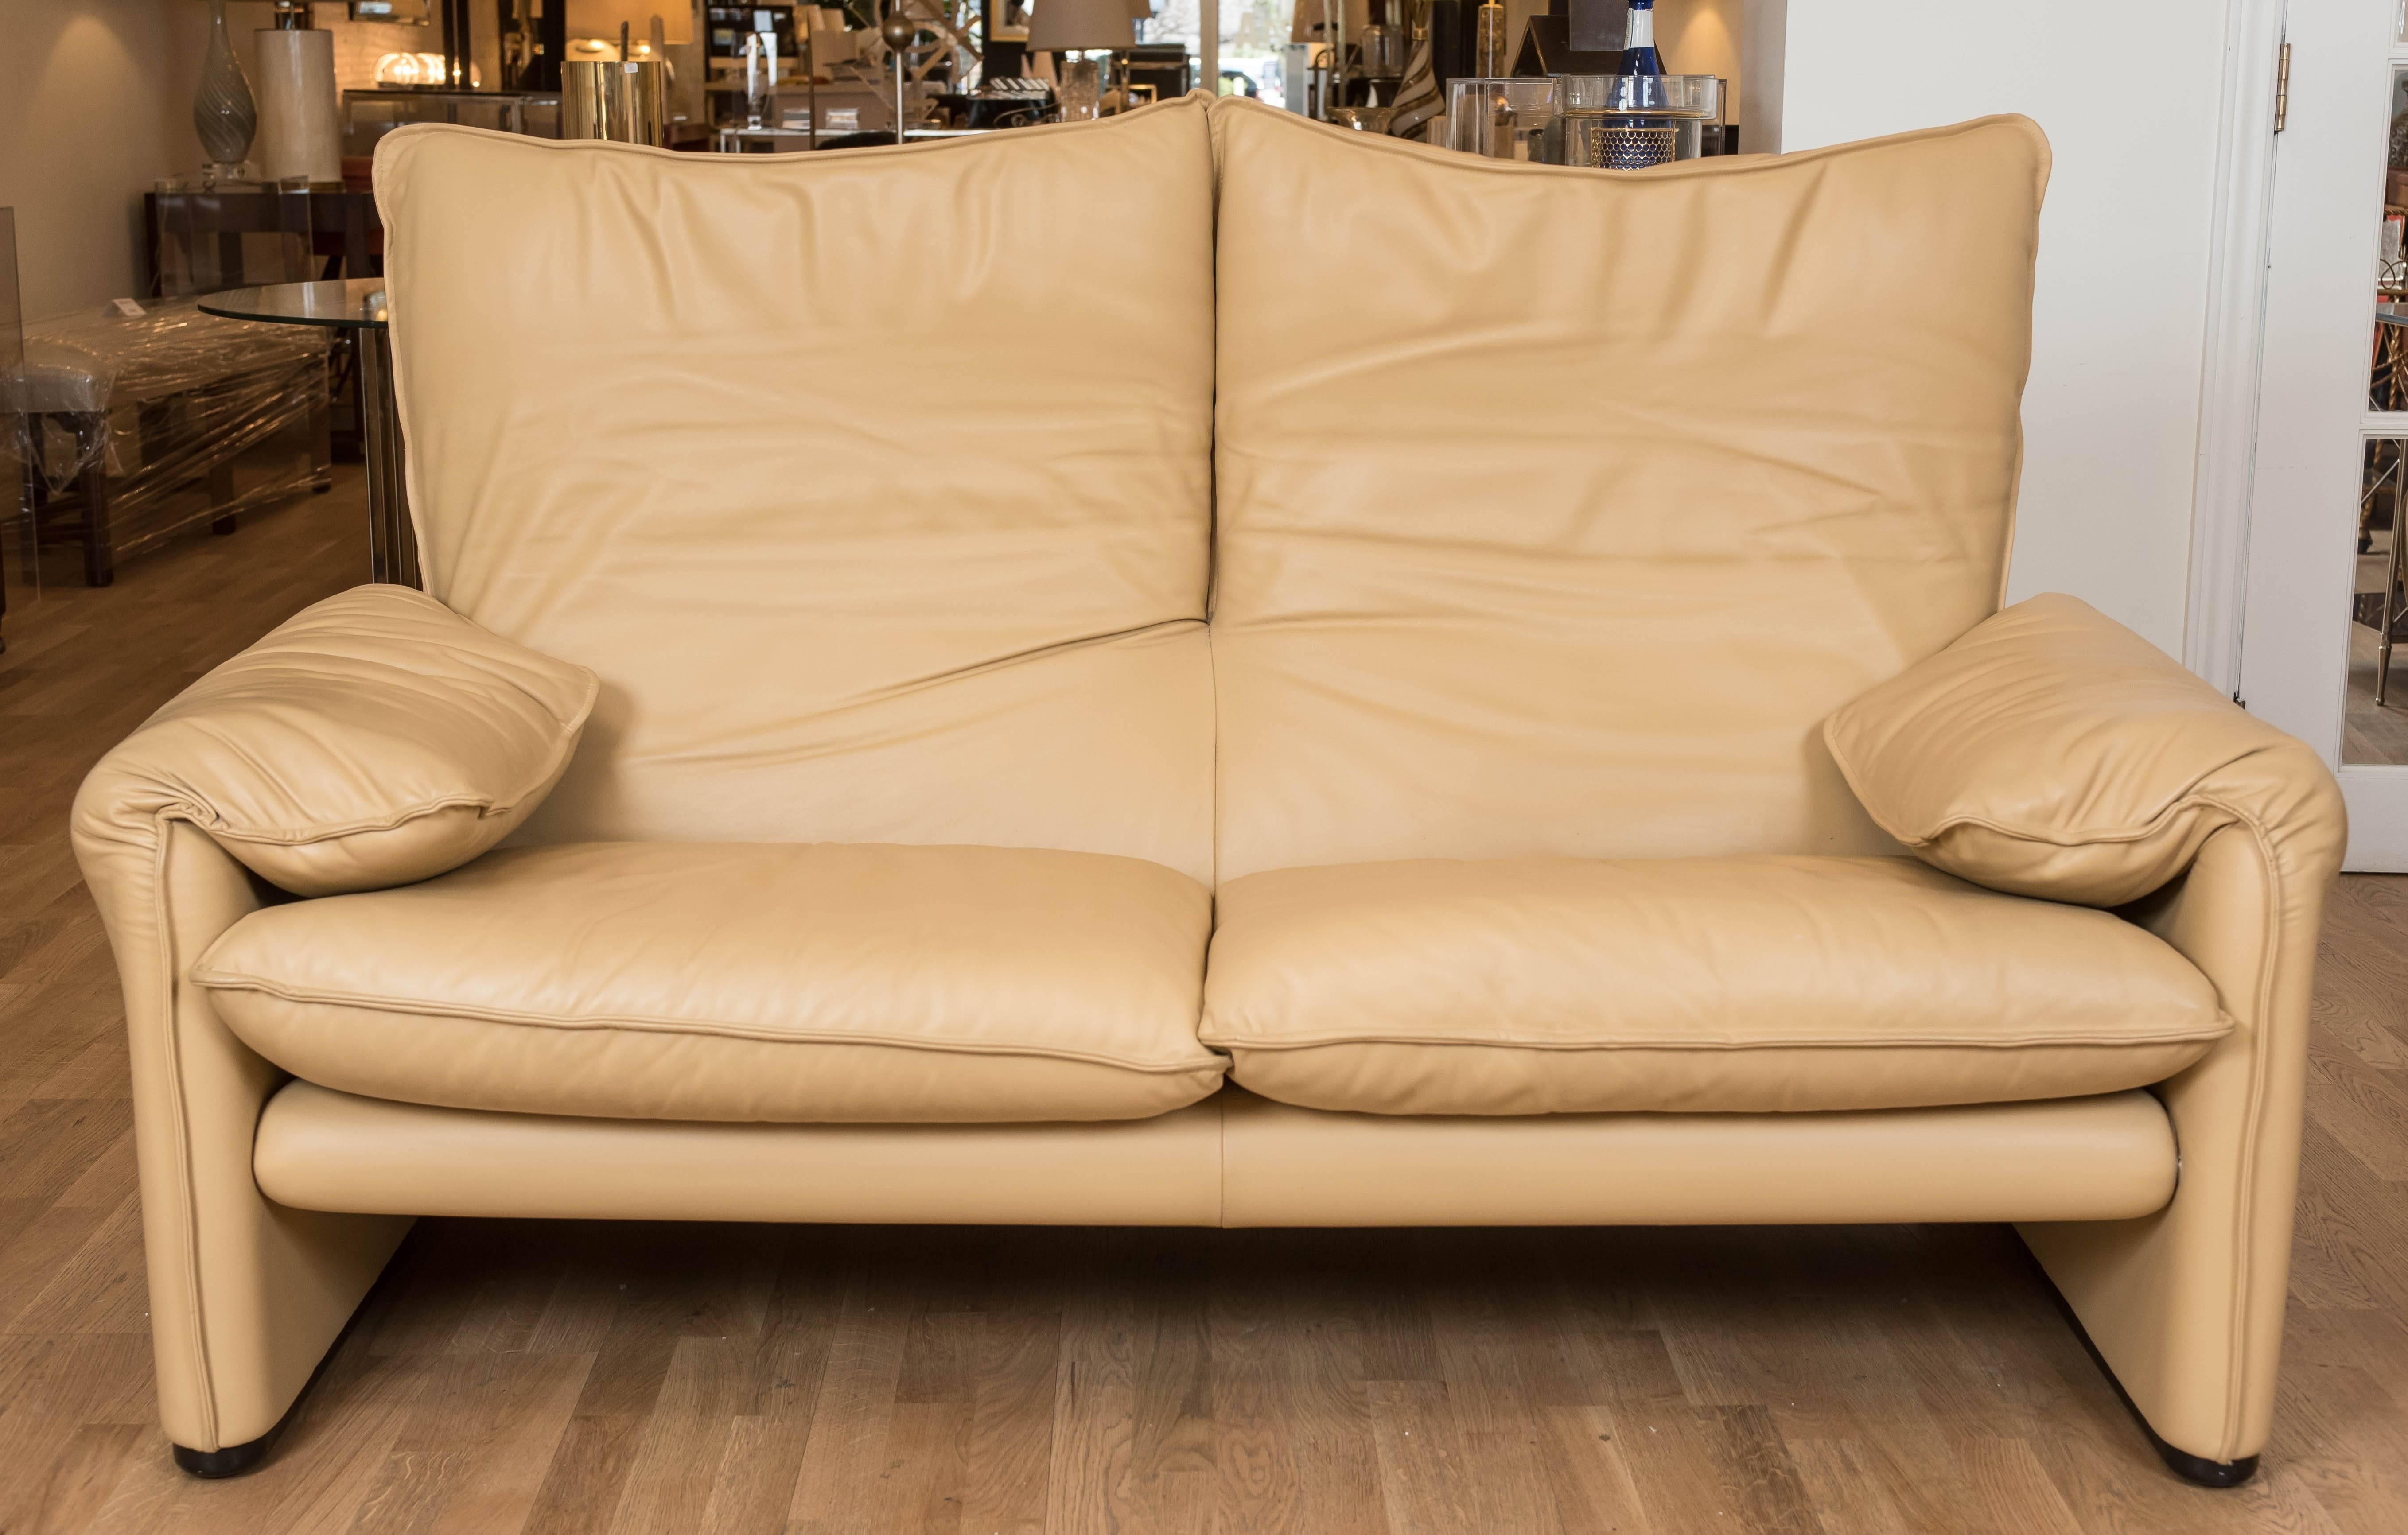 This sumptuous 1973 designed Maralunga two-seat sofa has been recently reupholstered in a "cafe au lait" colored executive leather. This Classic sofa is never out of style and built to last by world renowned furniture maker Cassina.